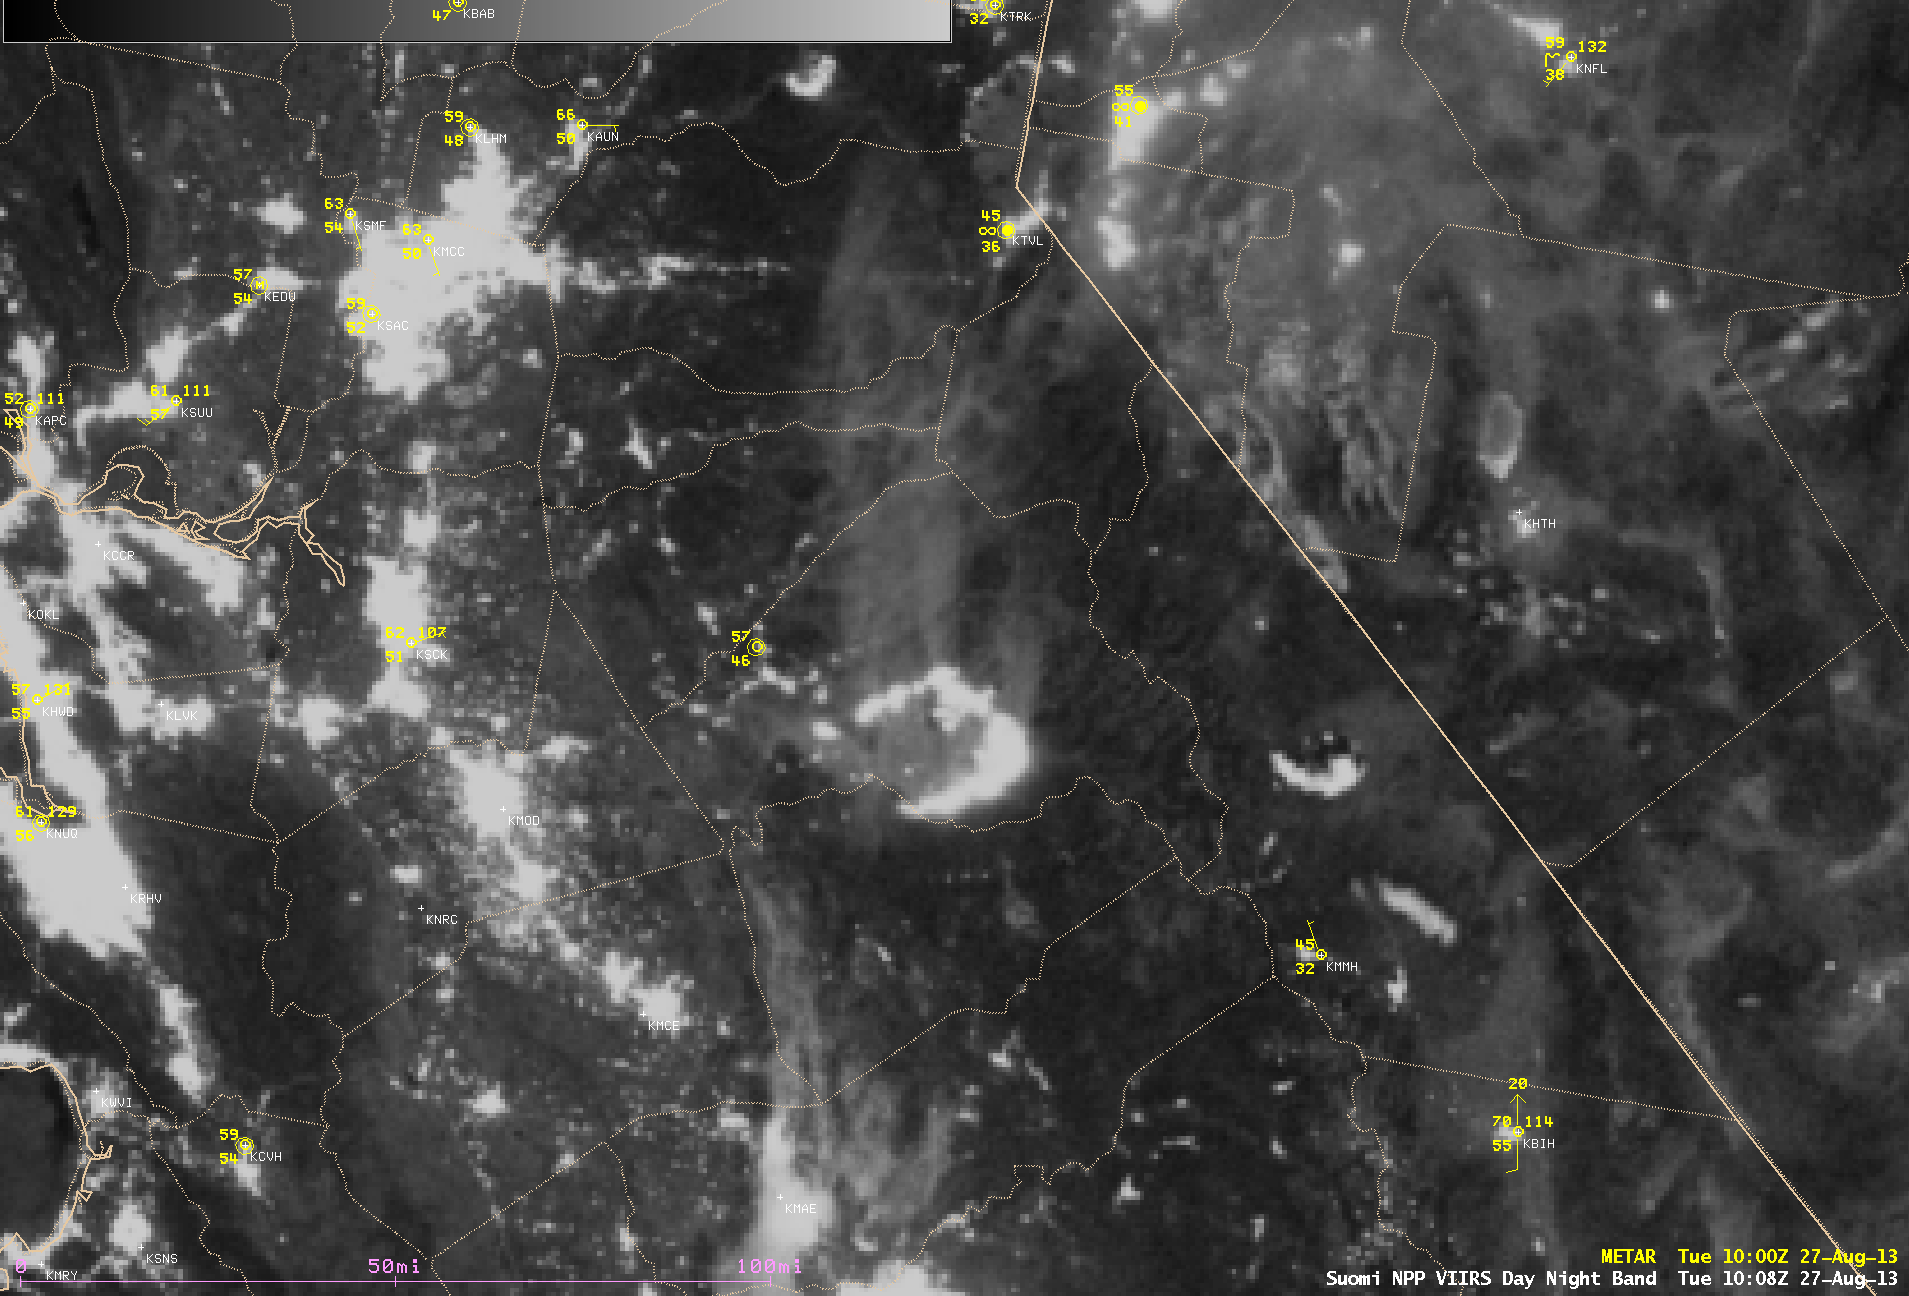 Suomi NPP VIIRS 0.7 Âµm Day/Night Band and 3.74 Âµm shortwave IR images (27 August)